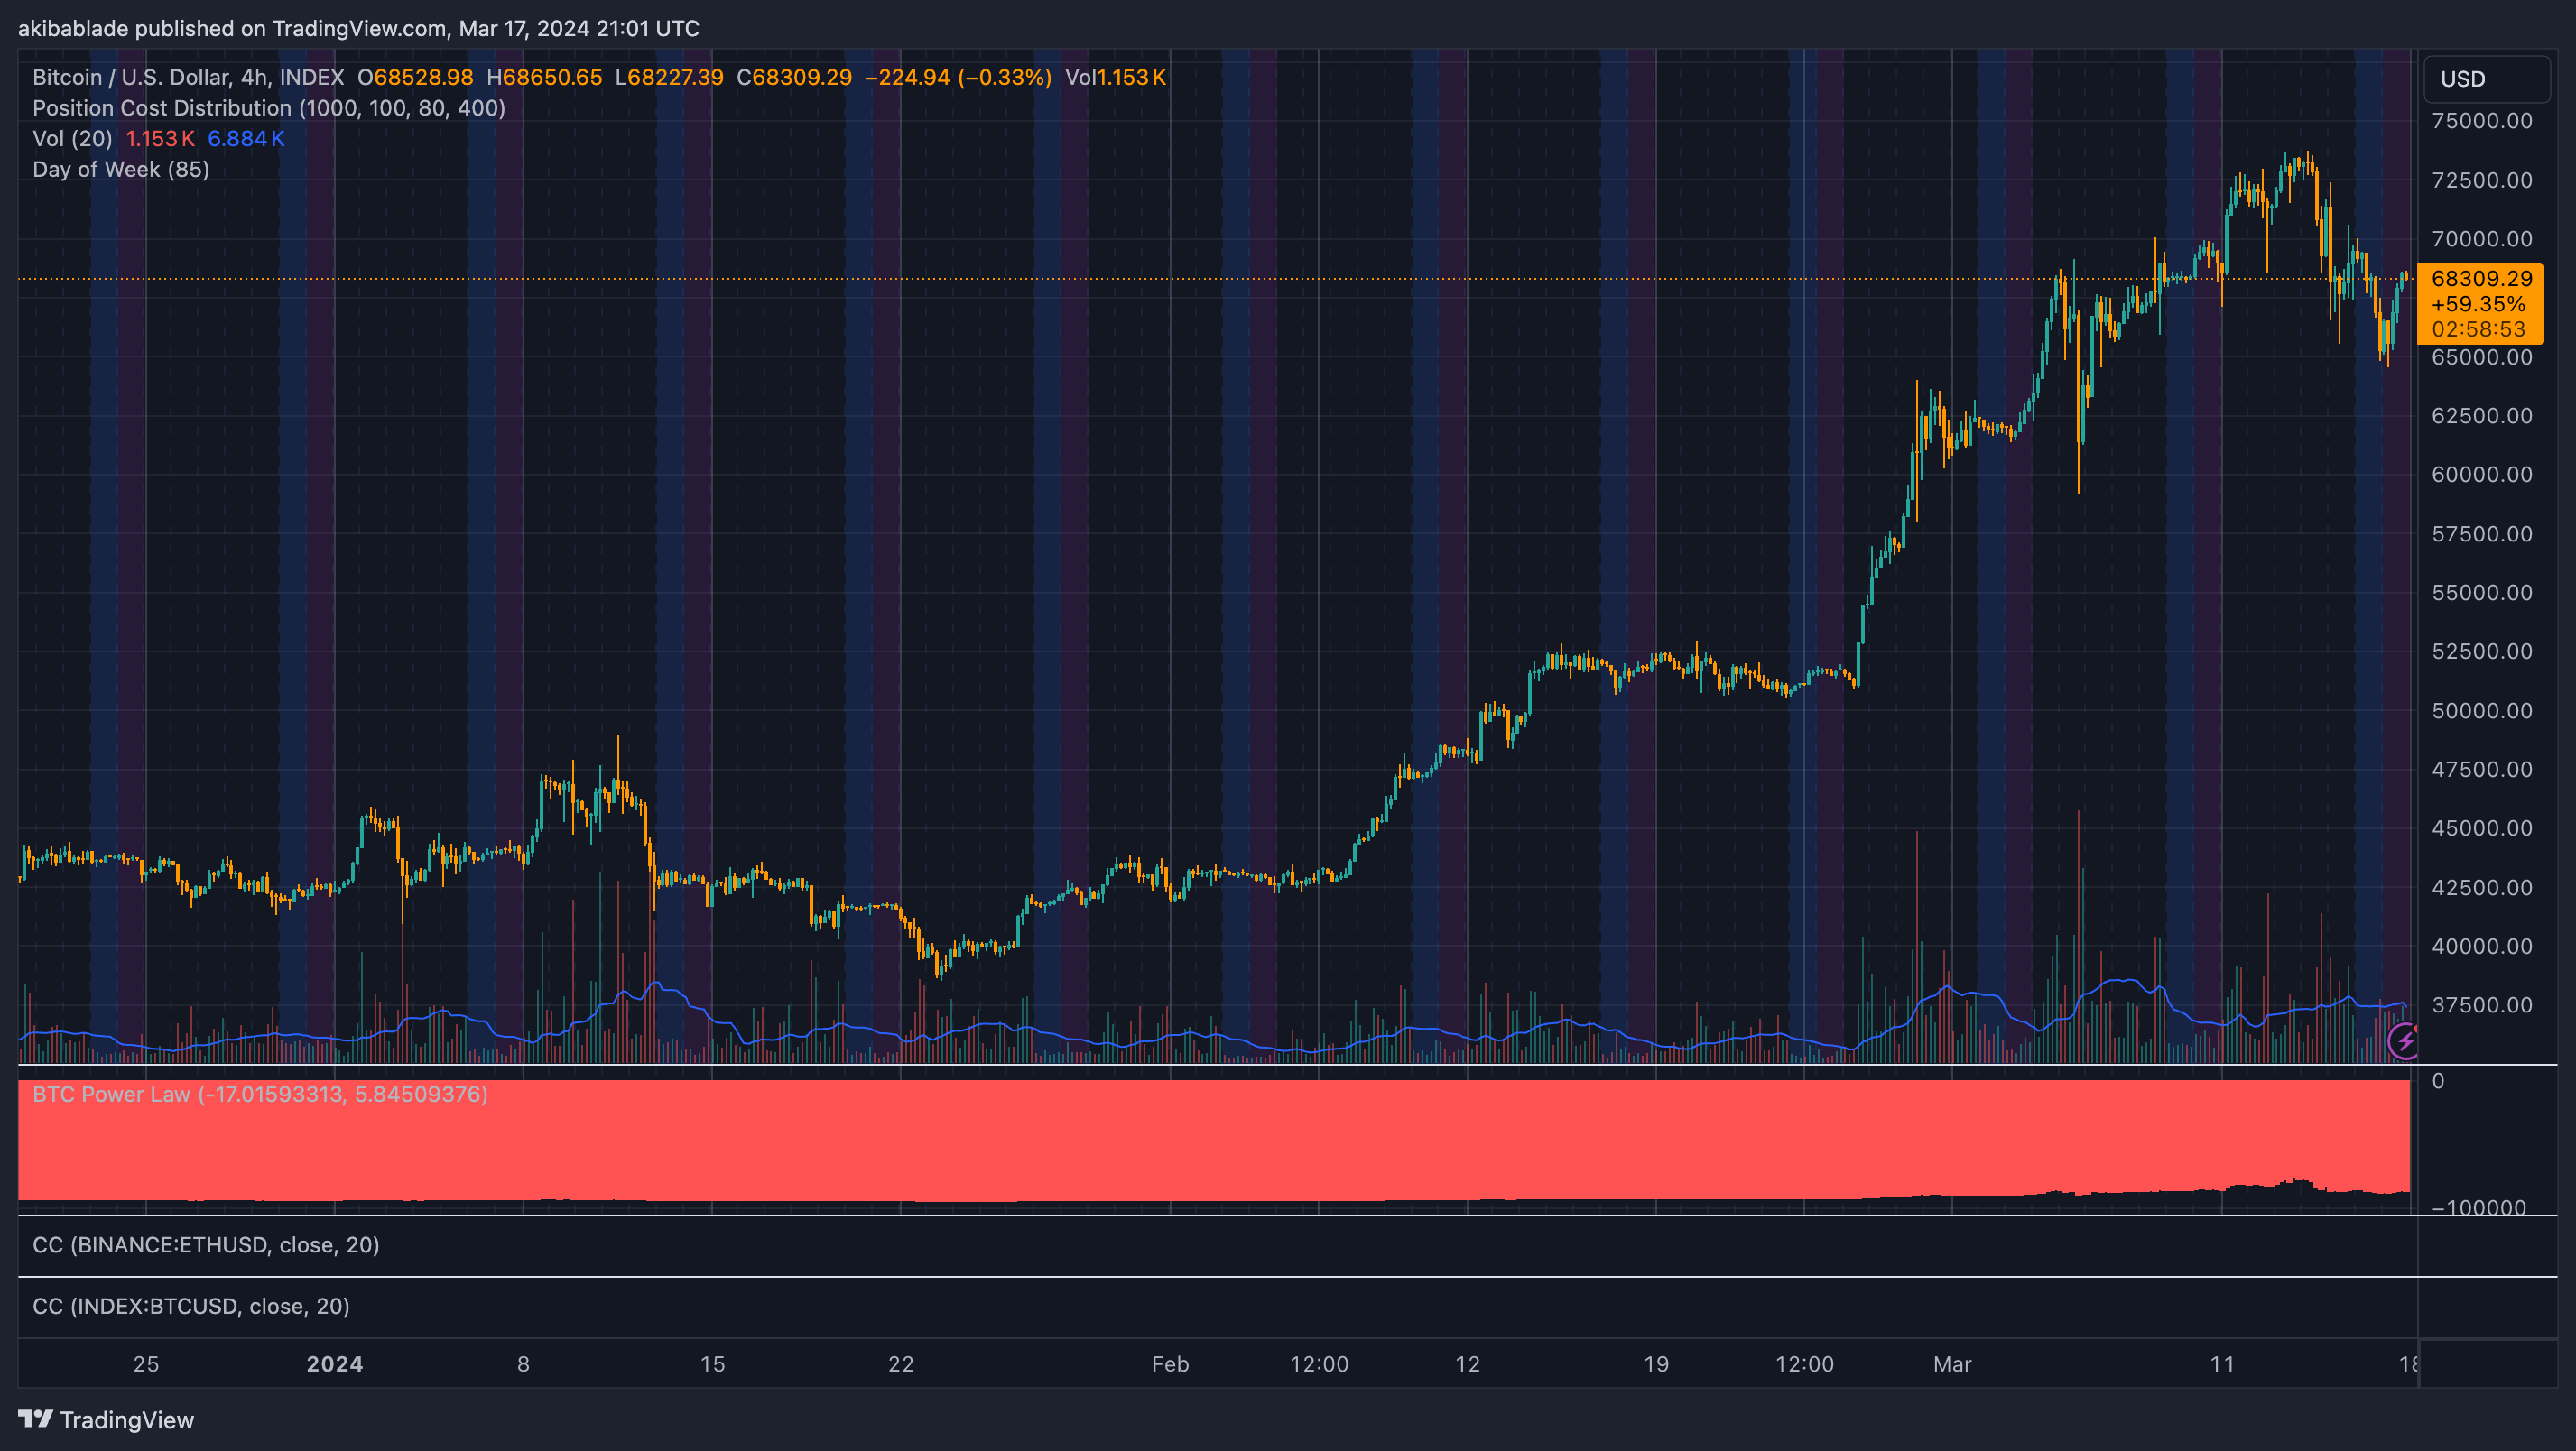 Bitcoin weekend trading in 2024 (Source: TradingView)